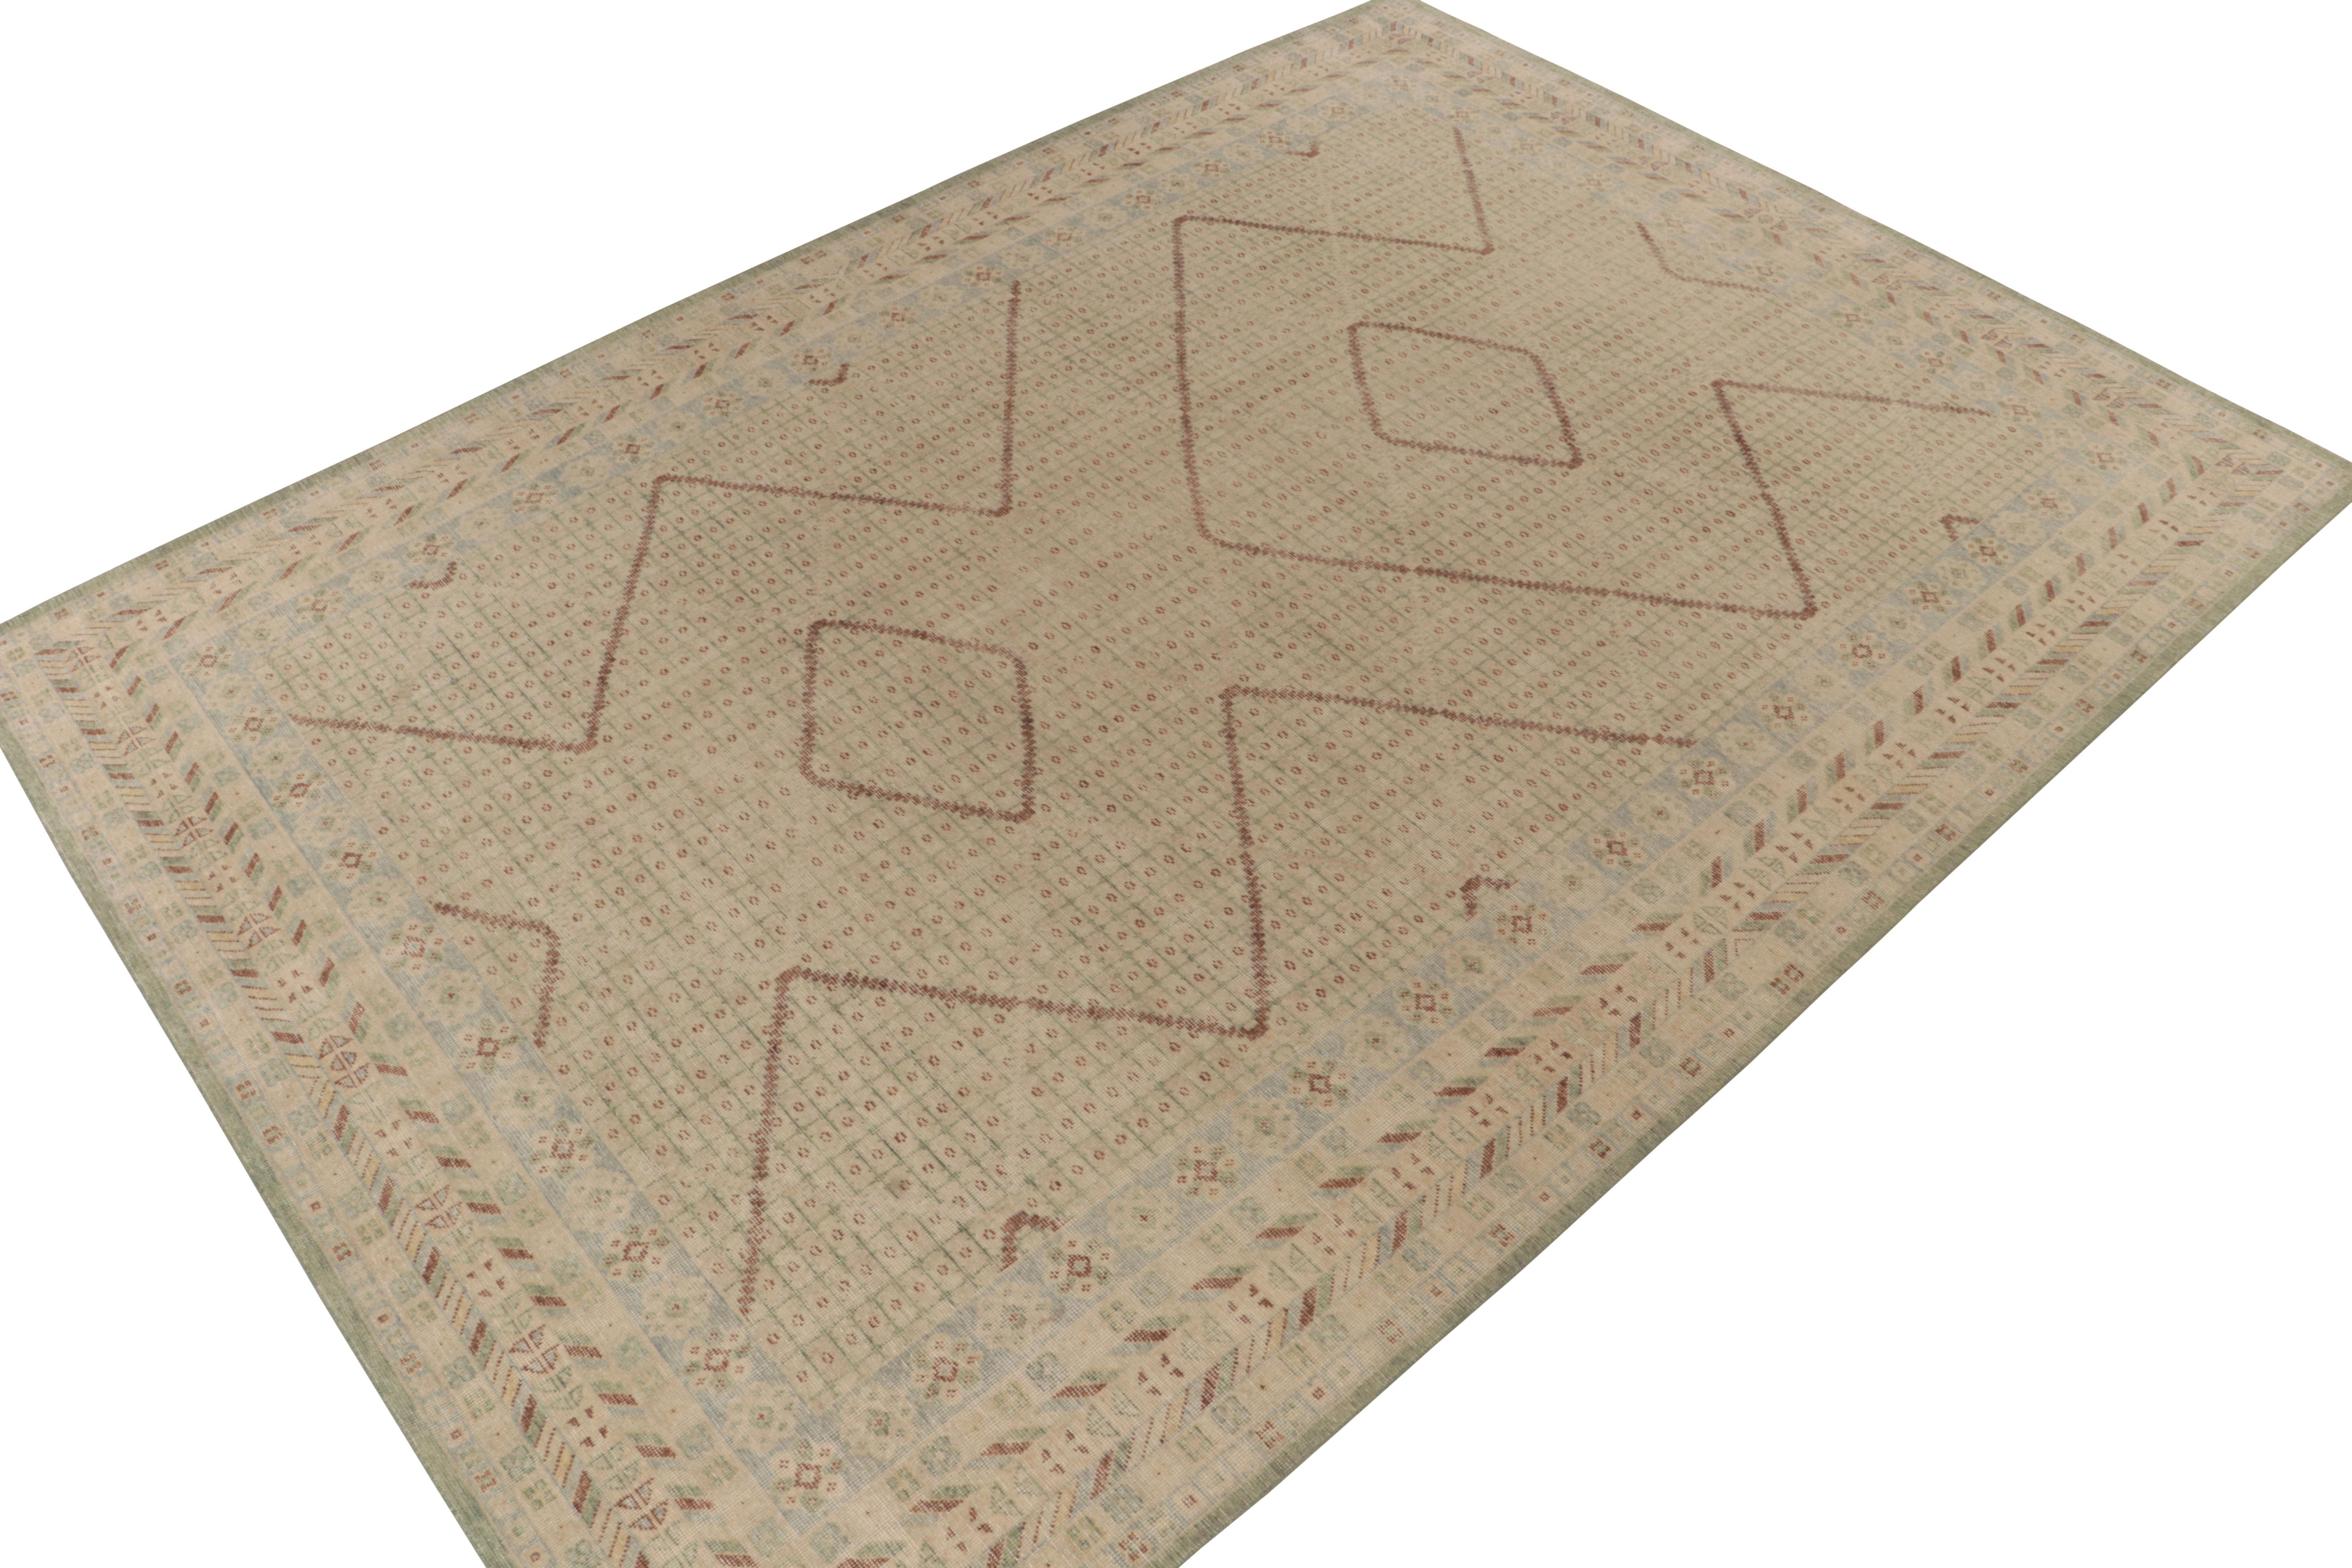 A 10x14 hand-knotted wool rug from Rug & Kilim’s Homage Collection.

On the Design: Inspired by Khotan Samarkand rugs, the vision reimagines classic traditional motifs & floral geometric patterns in beige-brown with a beautiful marriage of soft